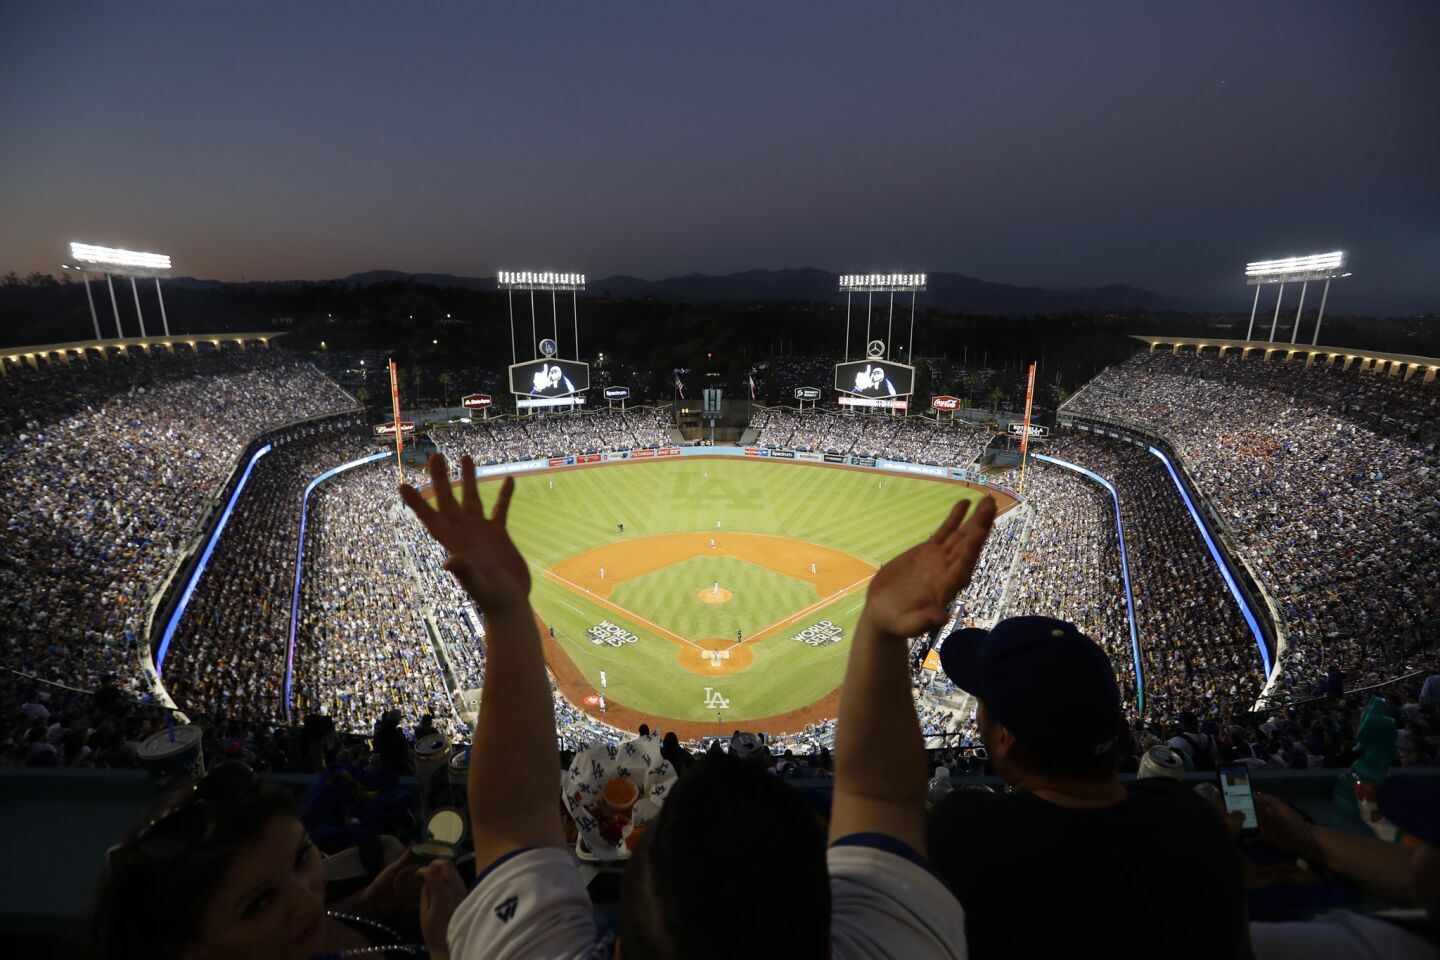 Dodgers fans wave souvenir towels as they cheer on the Dodgers from the top deck section during Game 2 of the 2017 World Series.